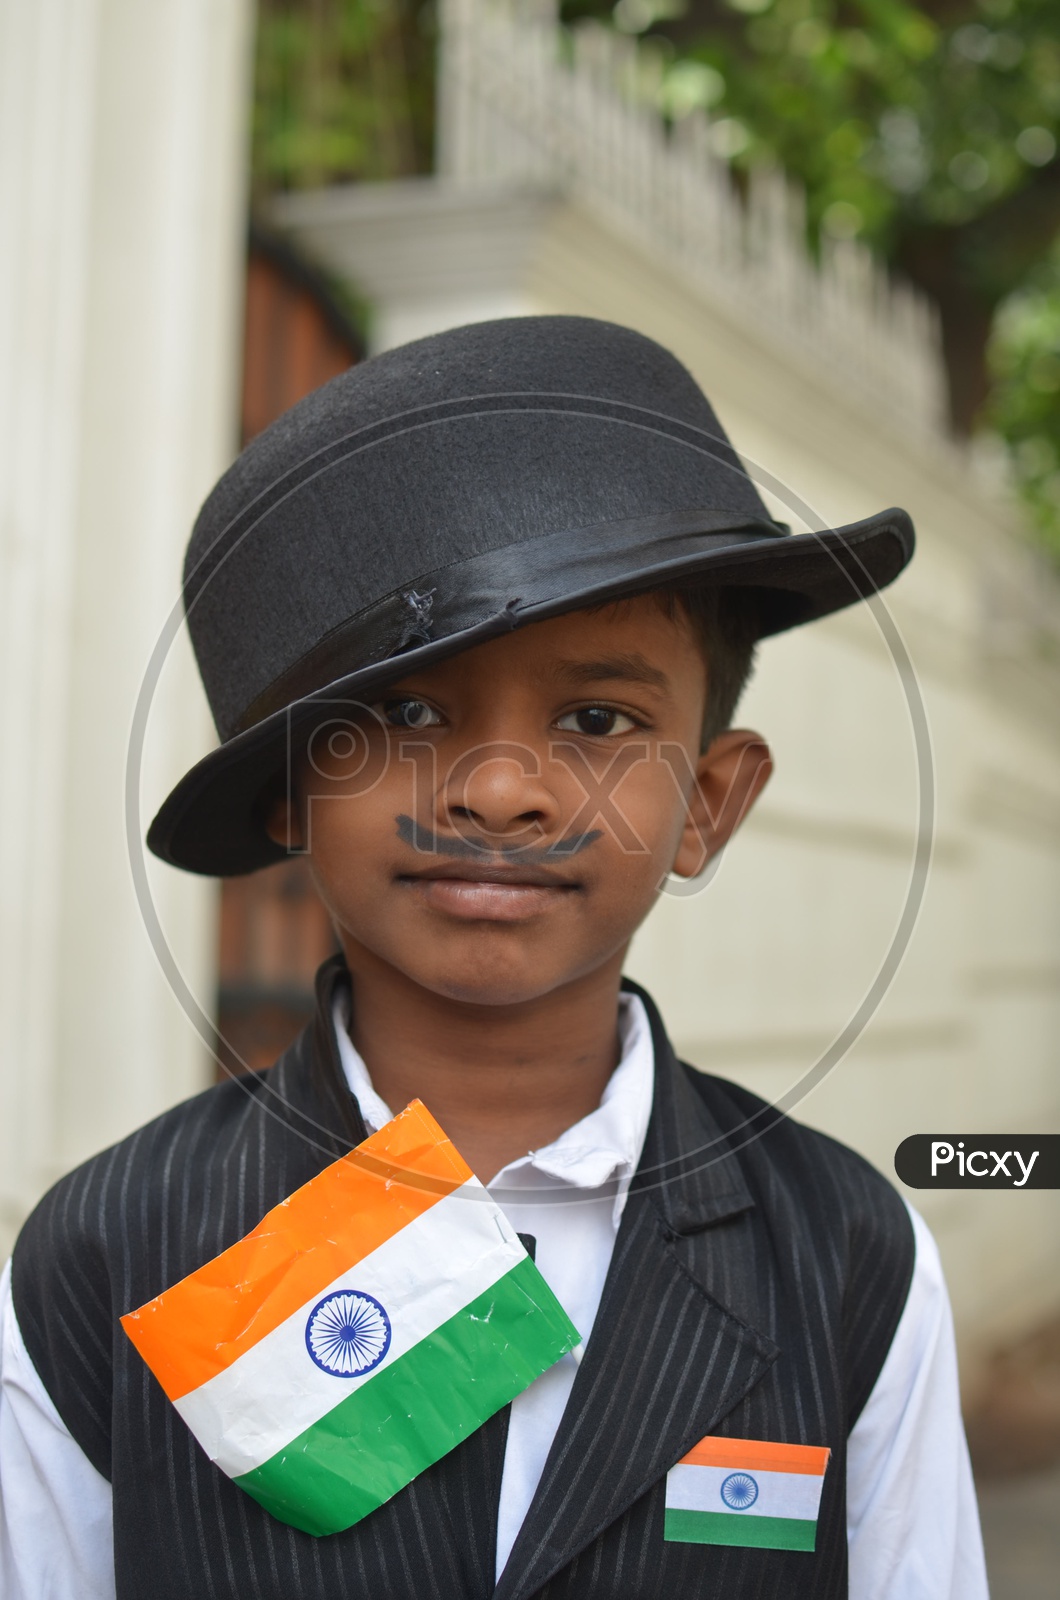 Boy Child Smiling Faces  / Indian Children Smiling Faces / Indian Boy Wearing National Flag on Independece day